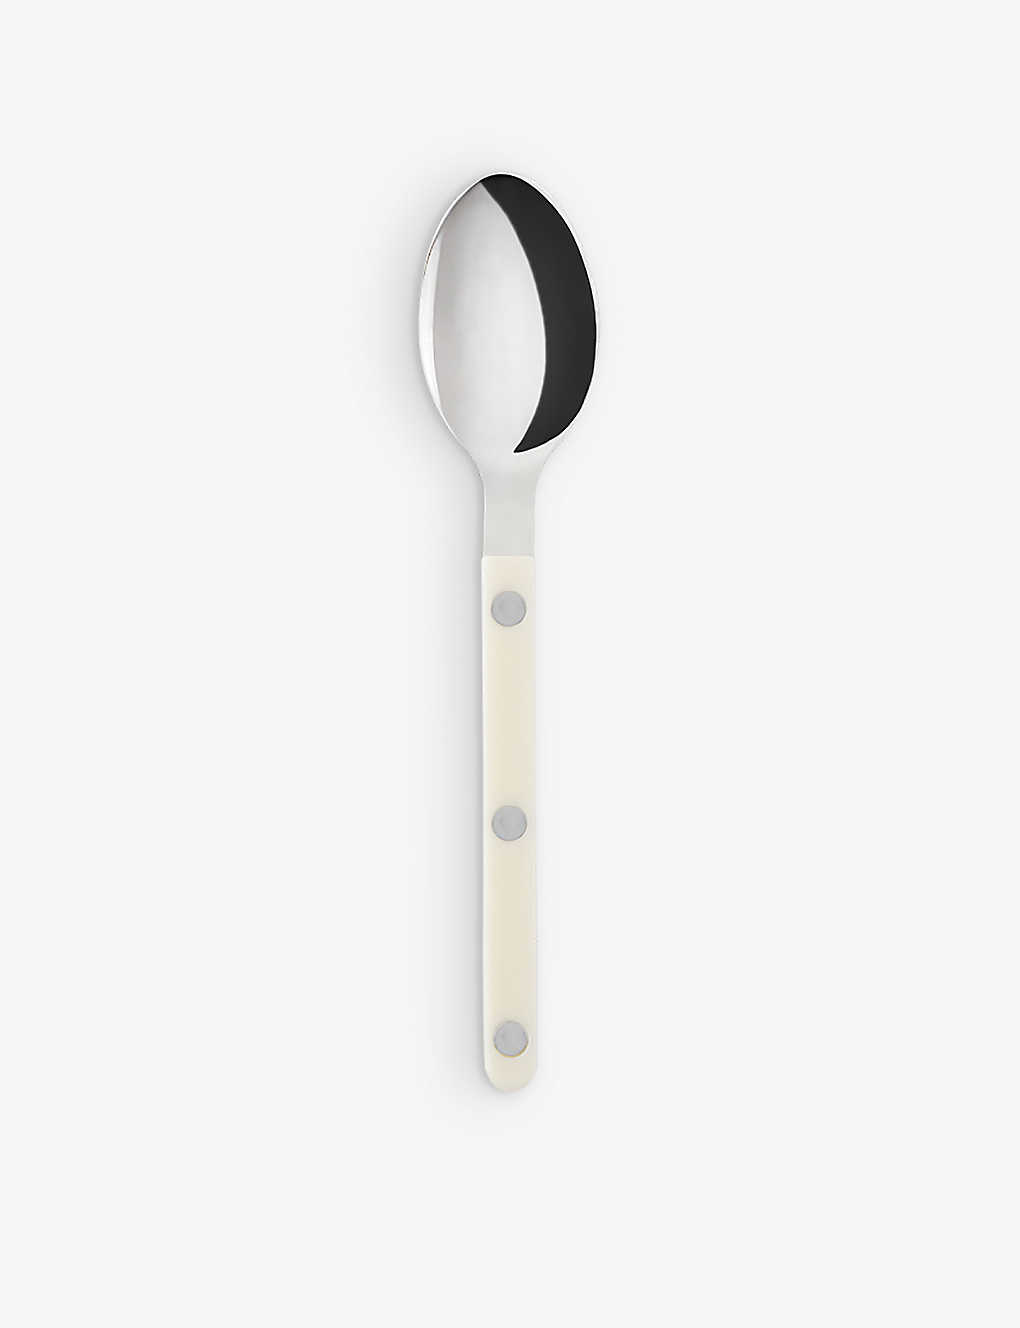 SABRE ビストロ ステンレススチール&アクリル ティースプーン 16cm Bistrot stainless-steel and acrylic teaspoon 16cm IVORY